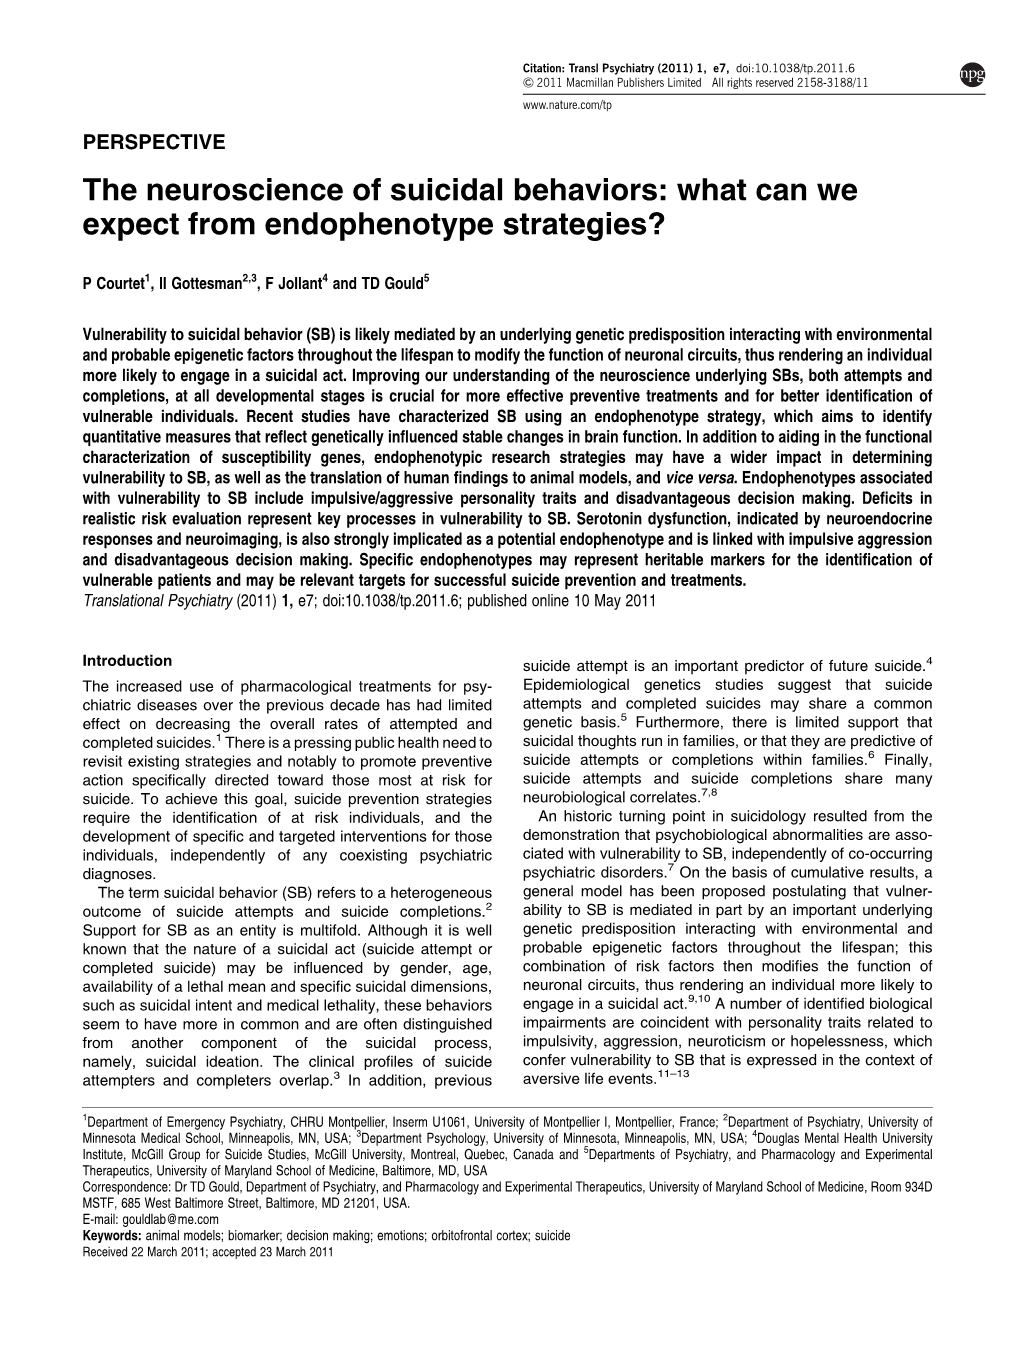 The Neuroscience of Suicidal Behaviors: What Can We Expect from Endophenotype Strategies?